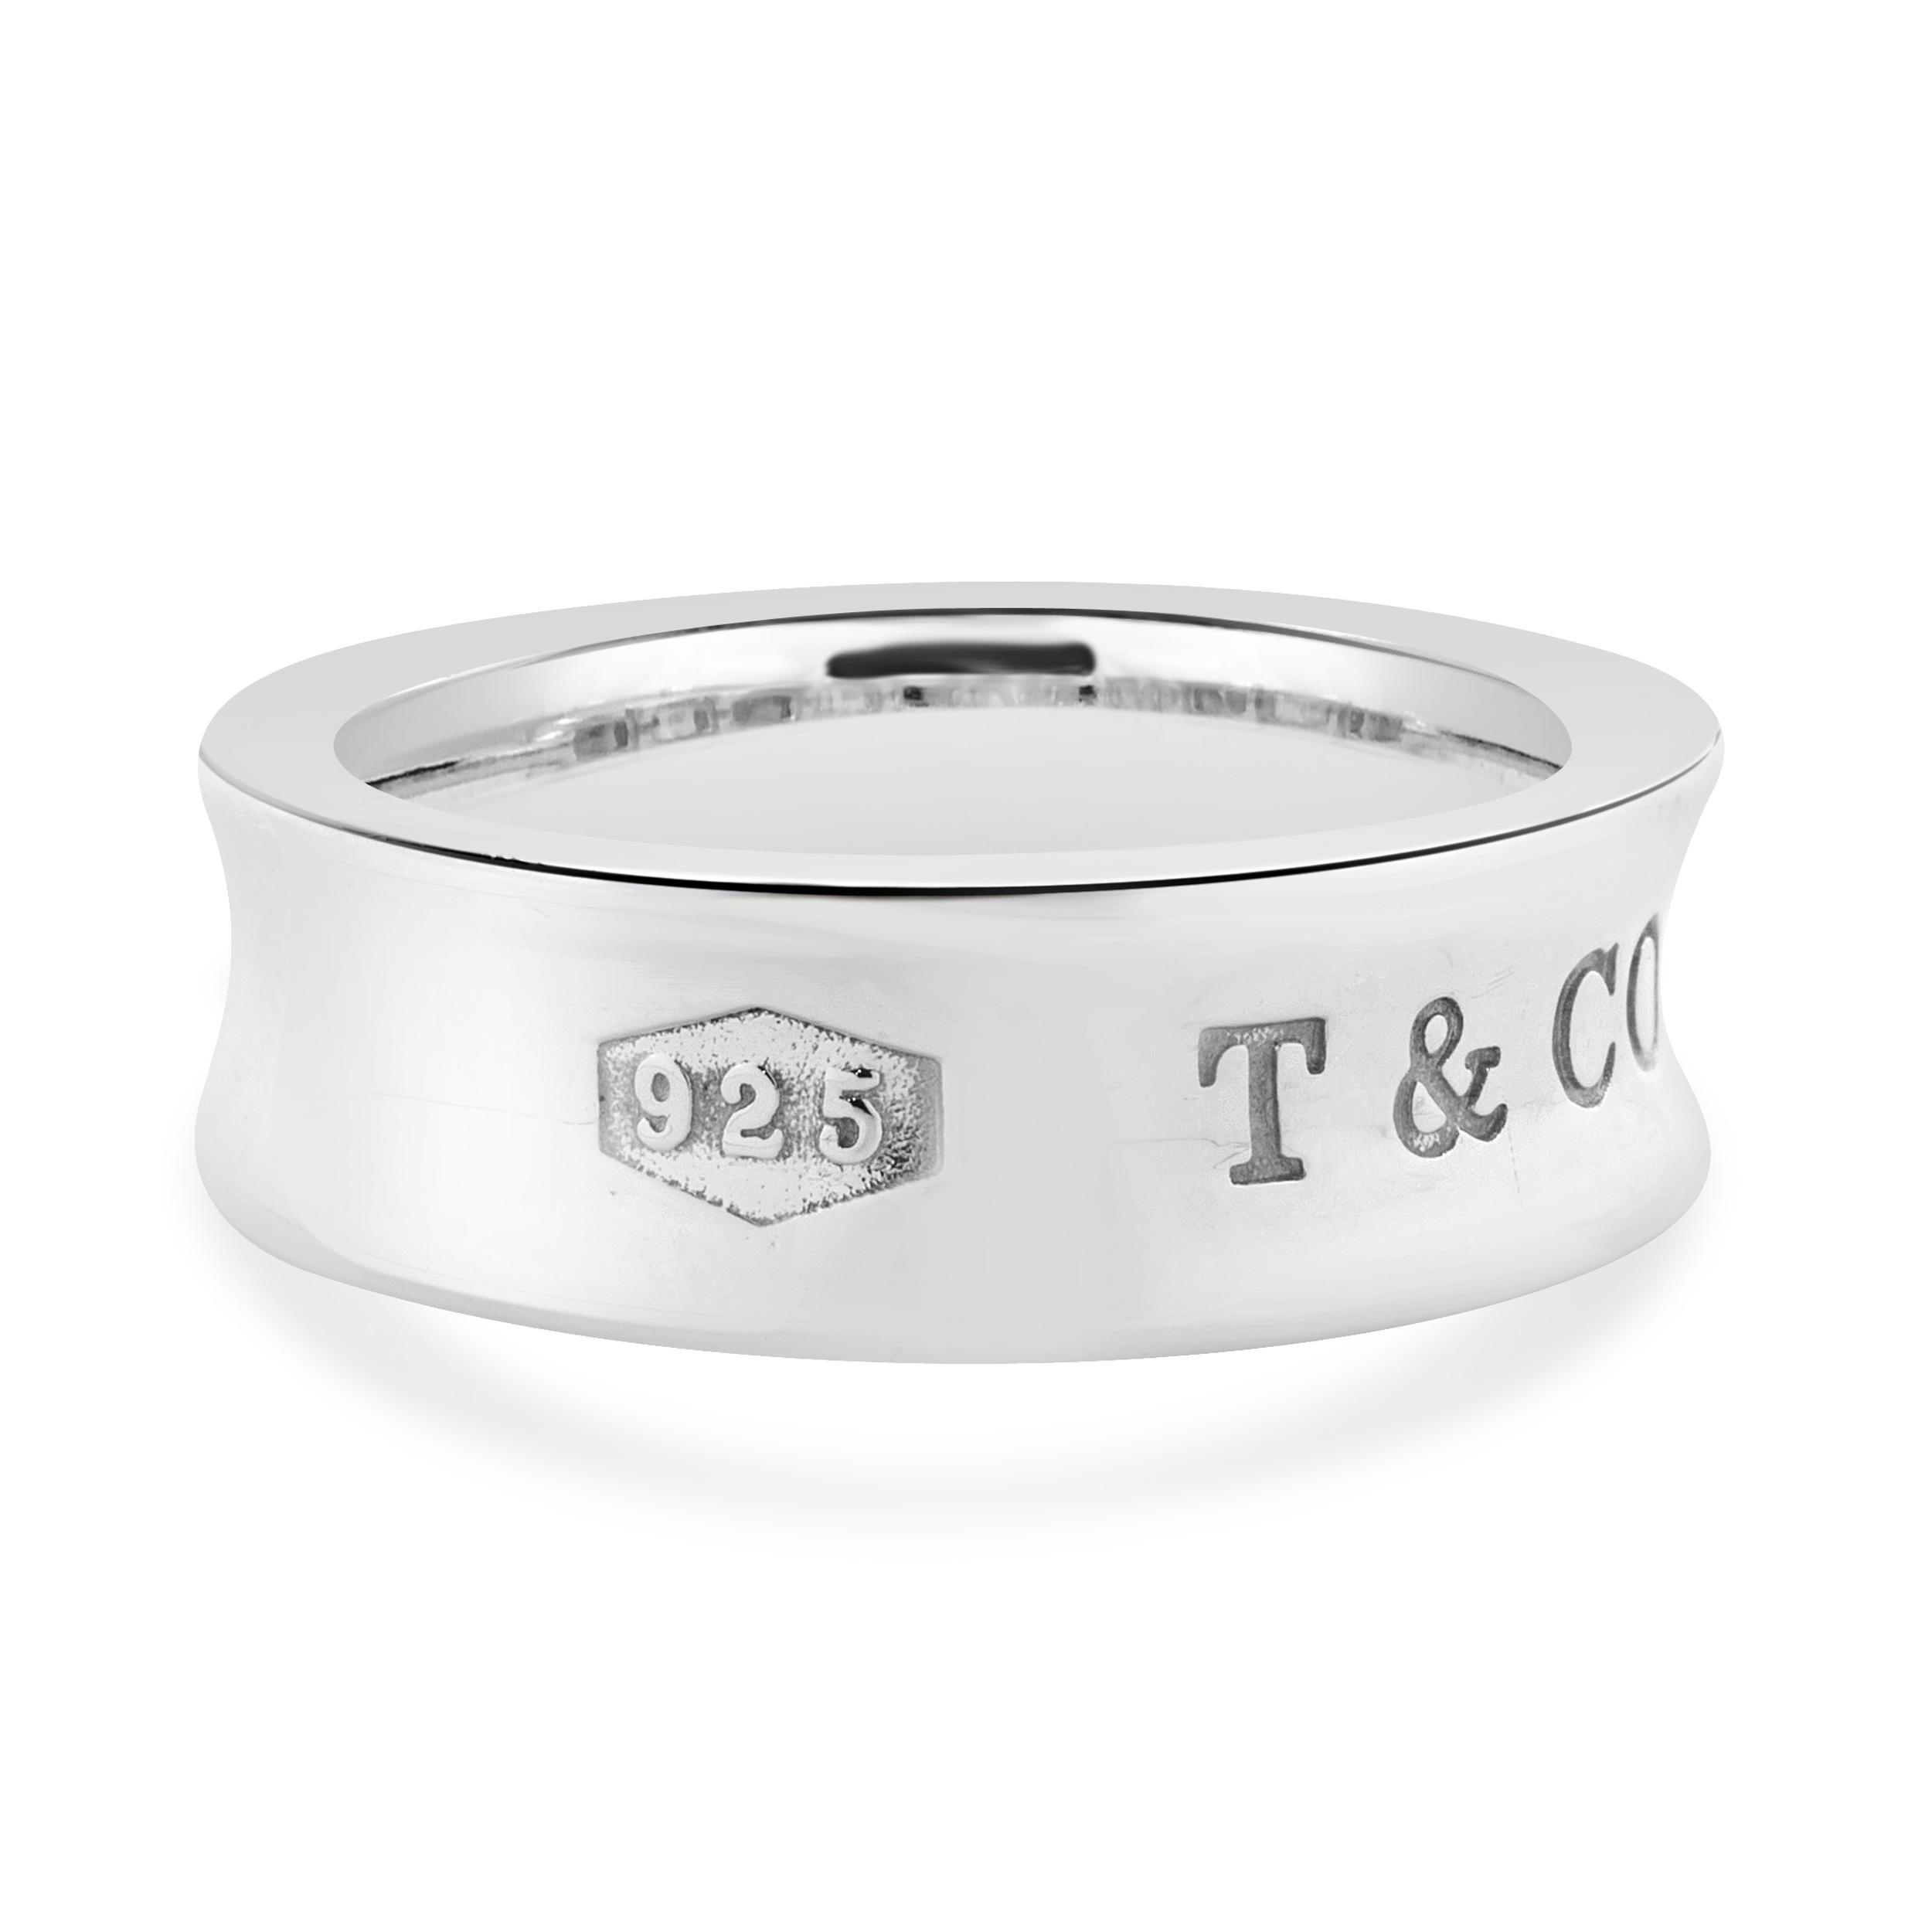 Tiffany & Co. Sterling Silver 1837 Band In Excellent Condition For Sale In Scottsdale, AZ